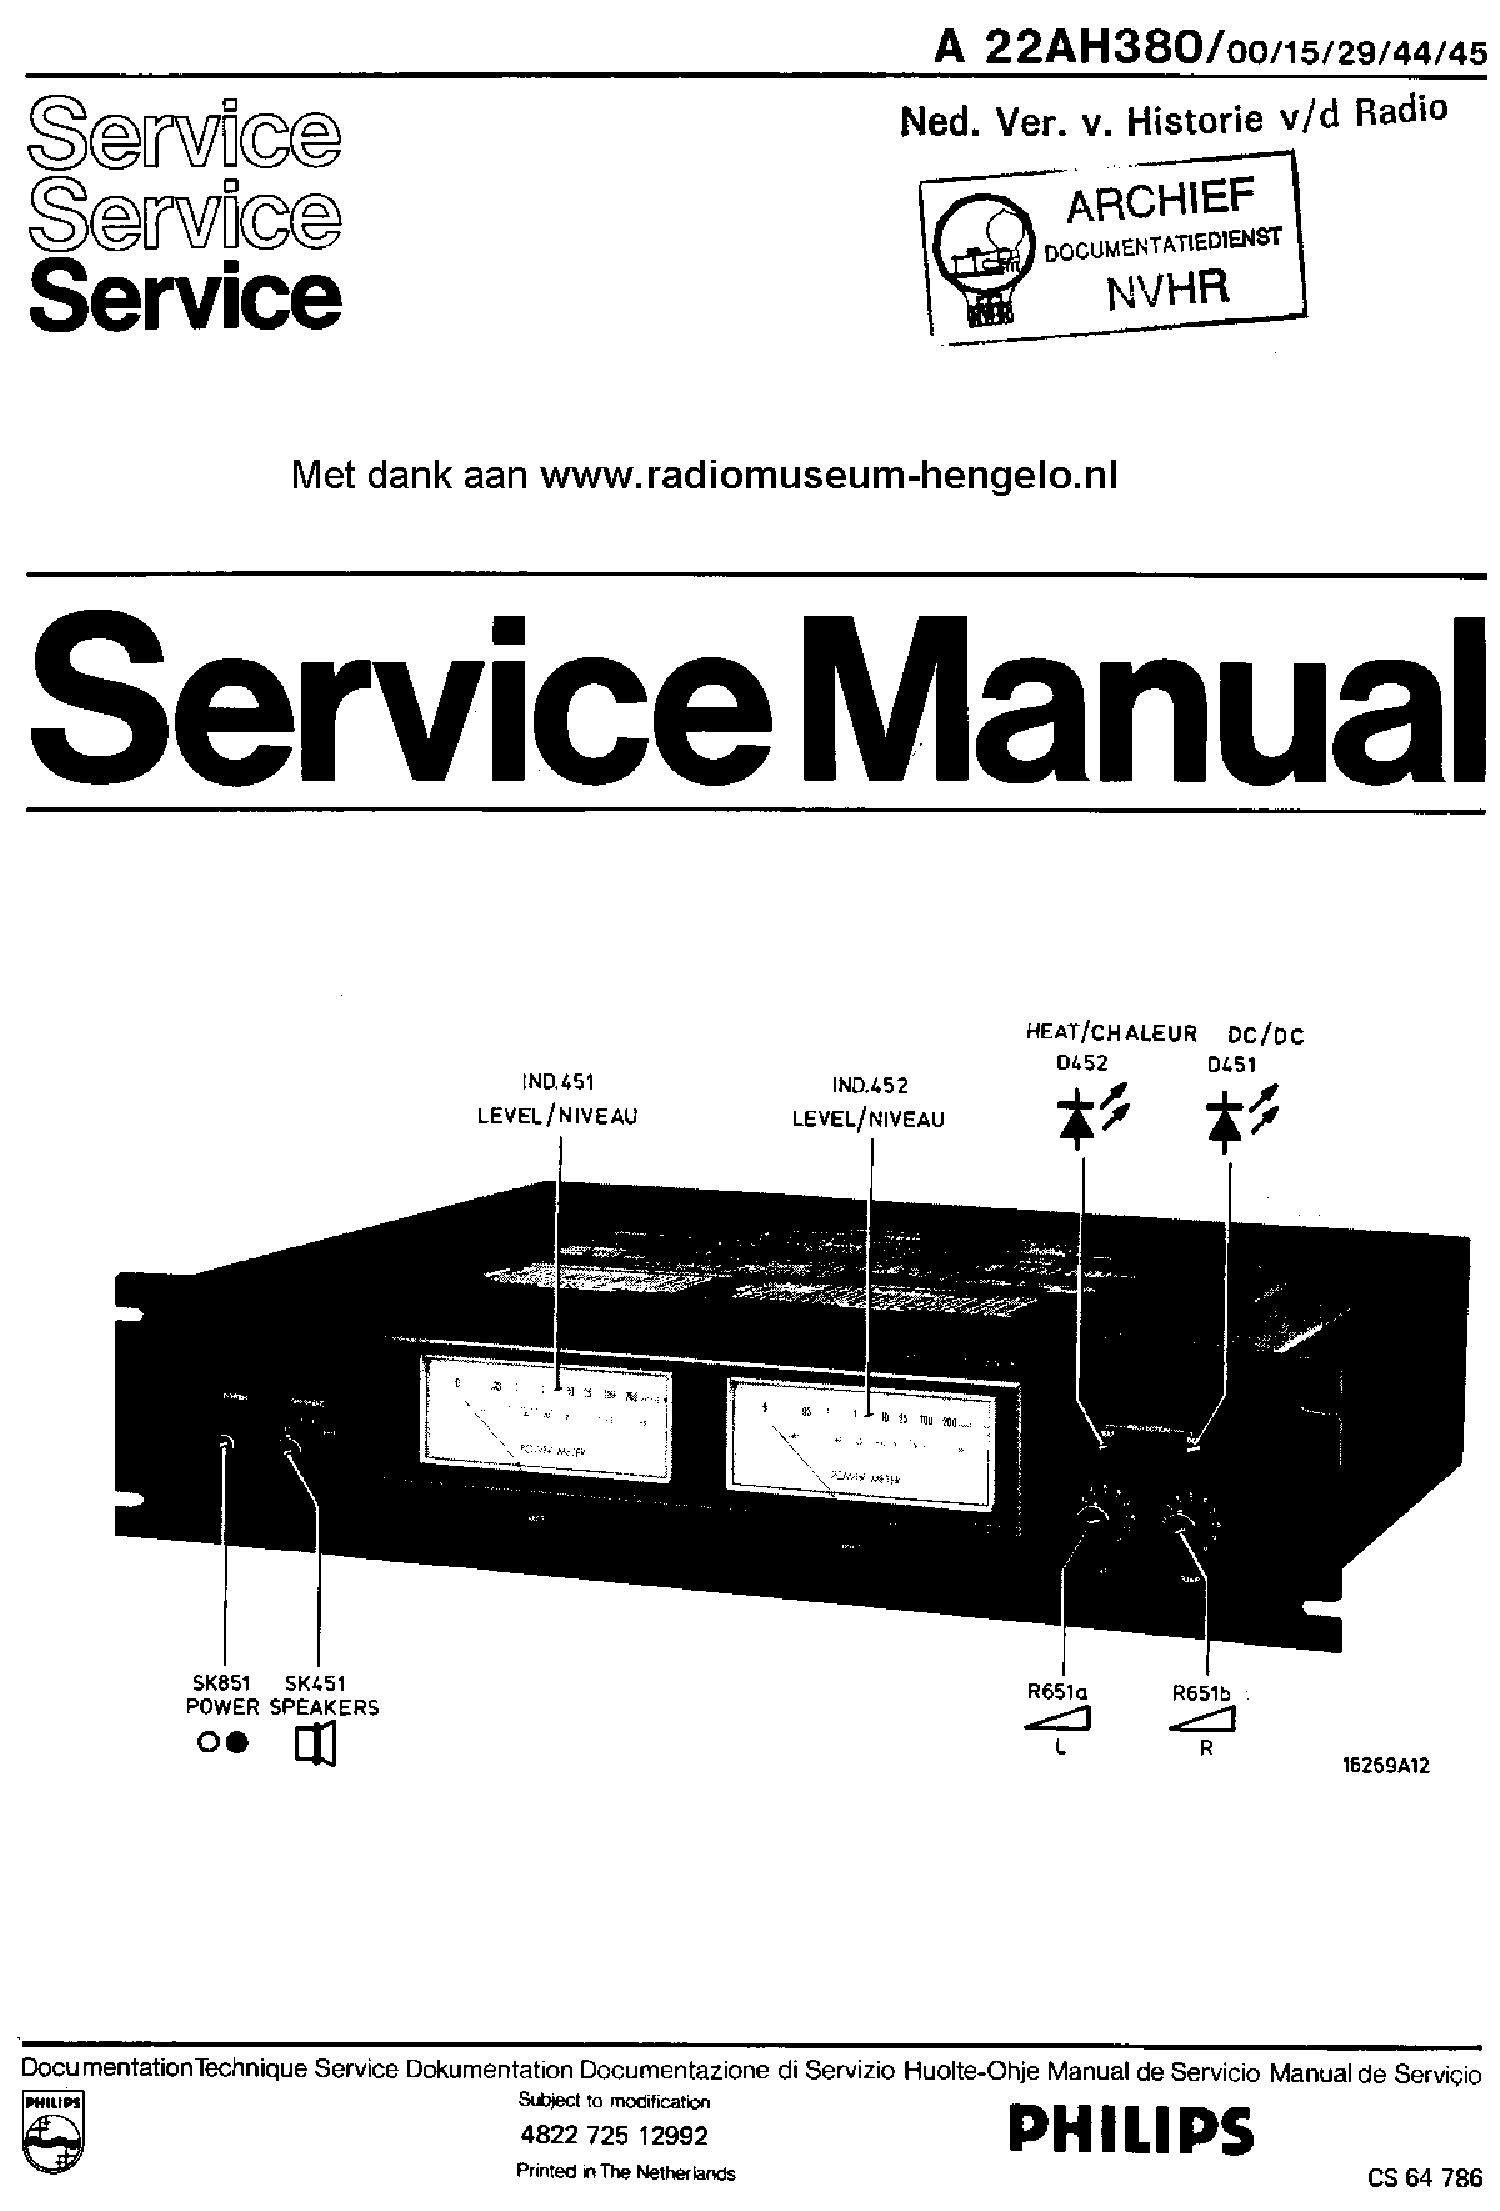 PHILIPS 22AH380-00-15-29-44-45 STEREO PA SM service manual (1st page)